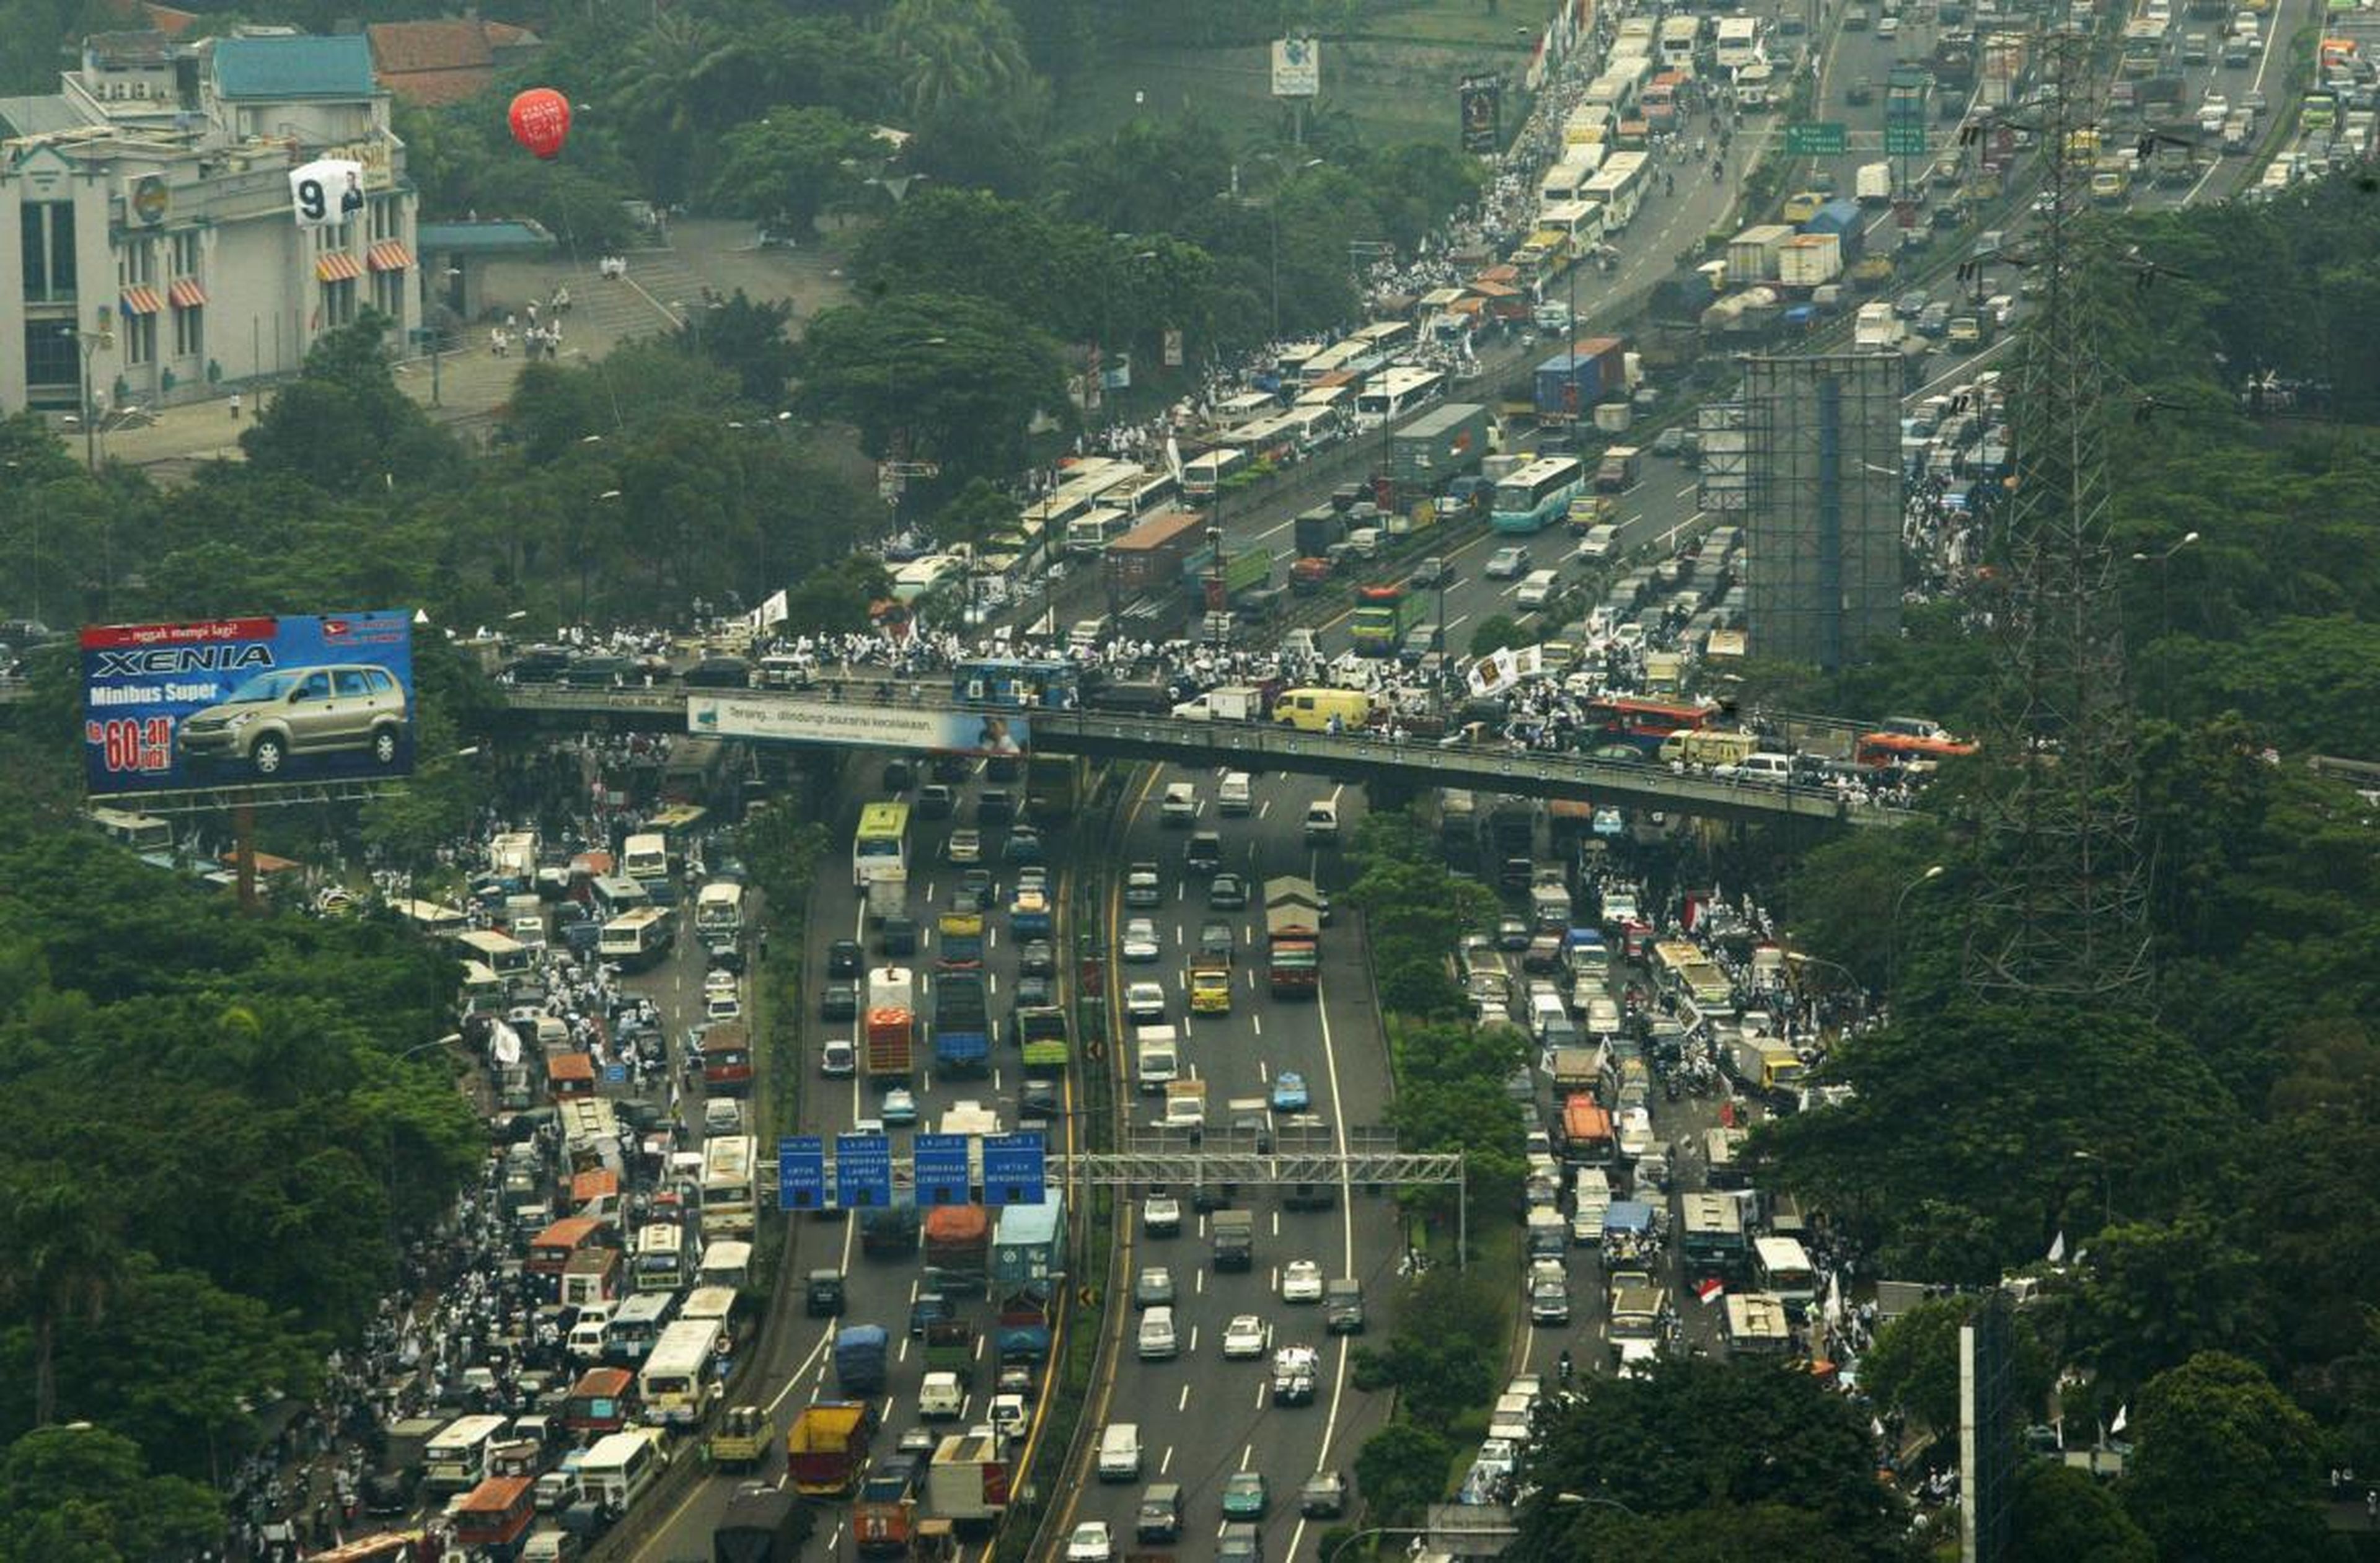 The main issue clogging Jakarta's streets and overburdening its roads is the 3.5 million daily commuters. In 2014, average vehicle speed was marked at 11 mph.